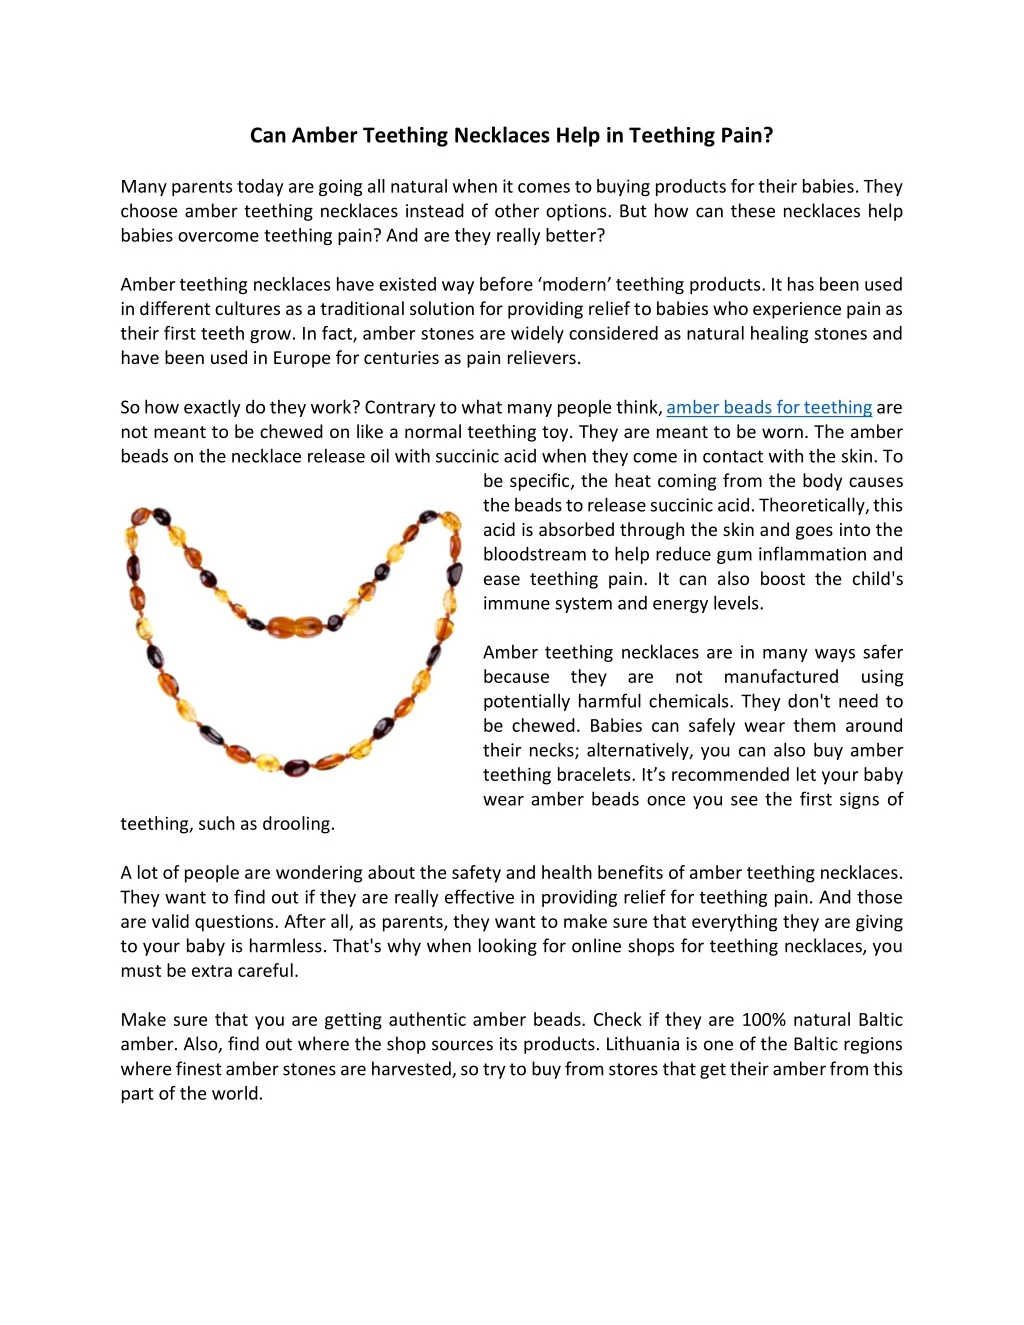 can amber teething necklaces help in teething pain